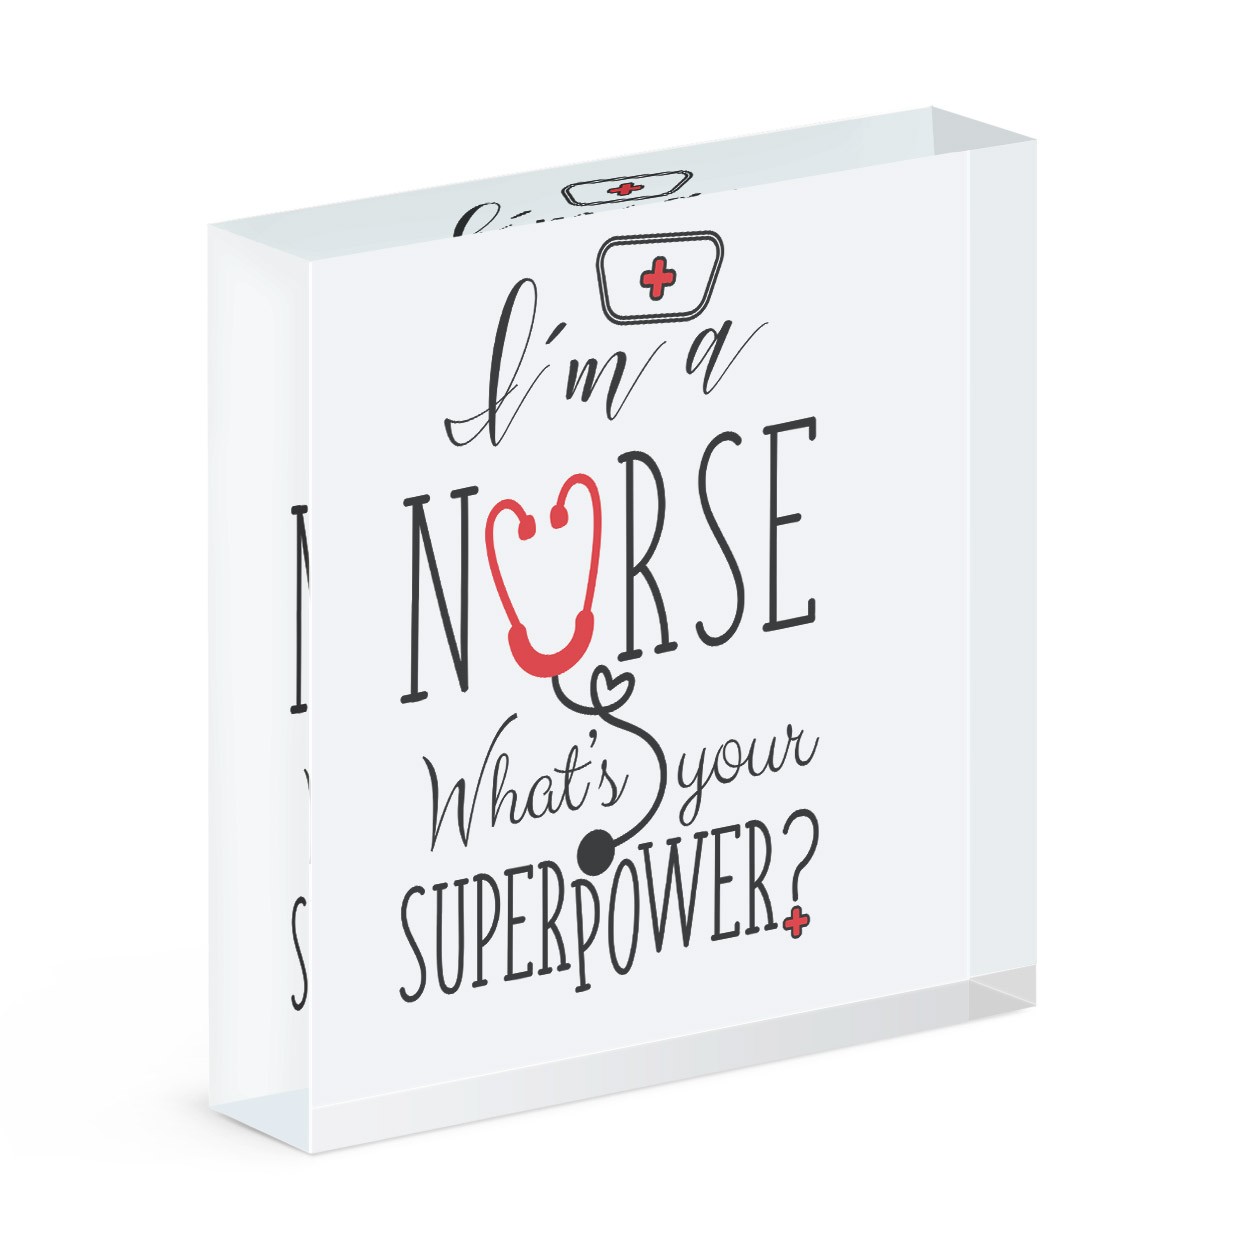 I'm A Nurse What's Your Superpower Acrylic Block